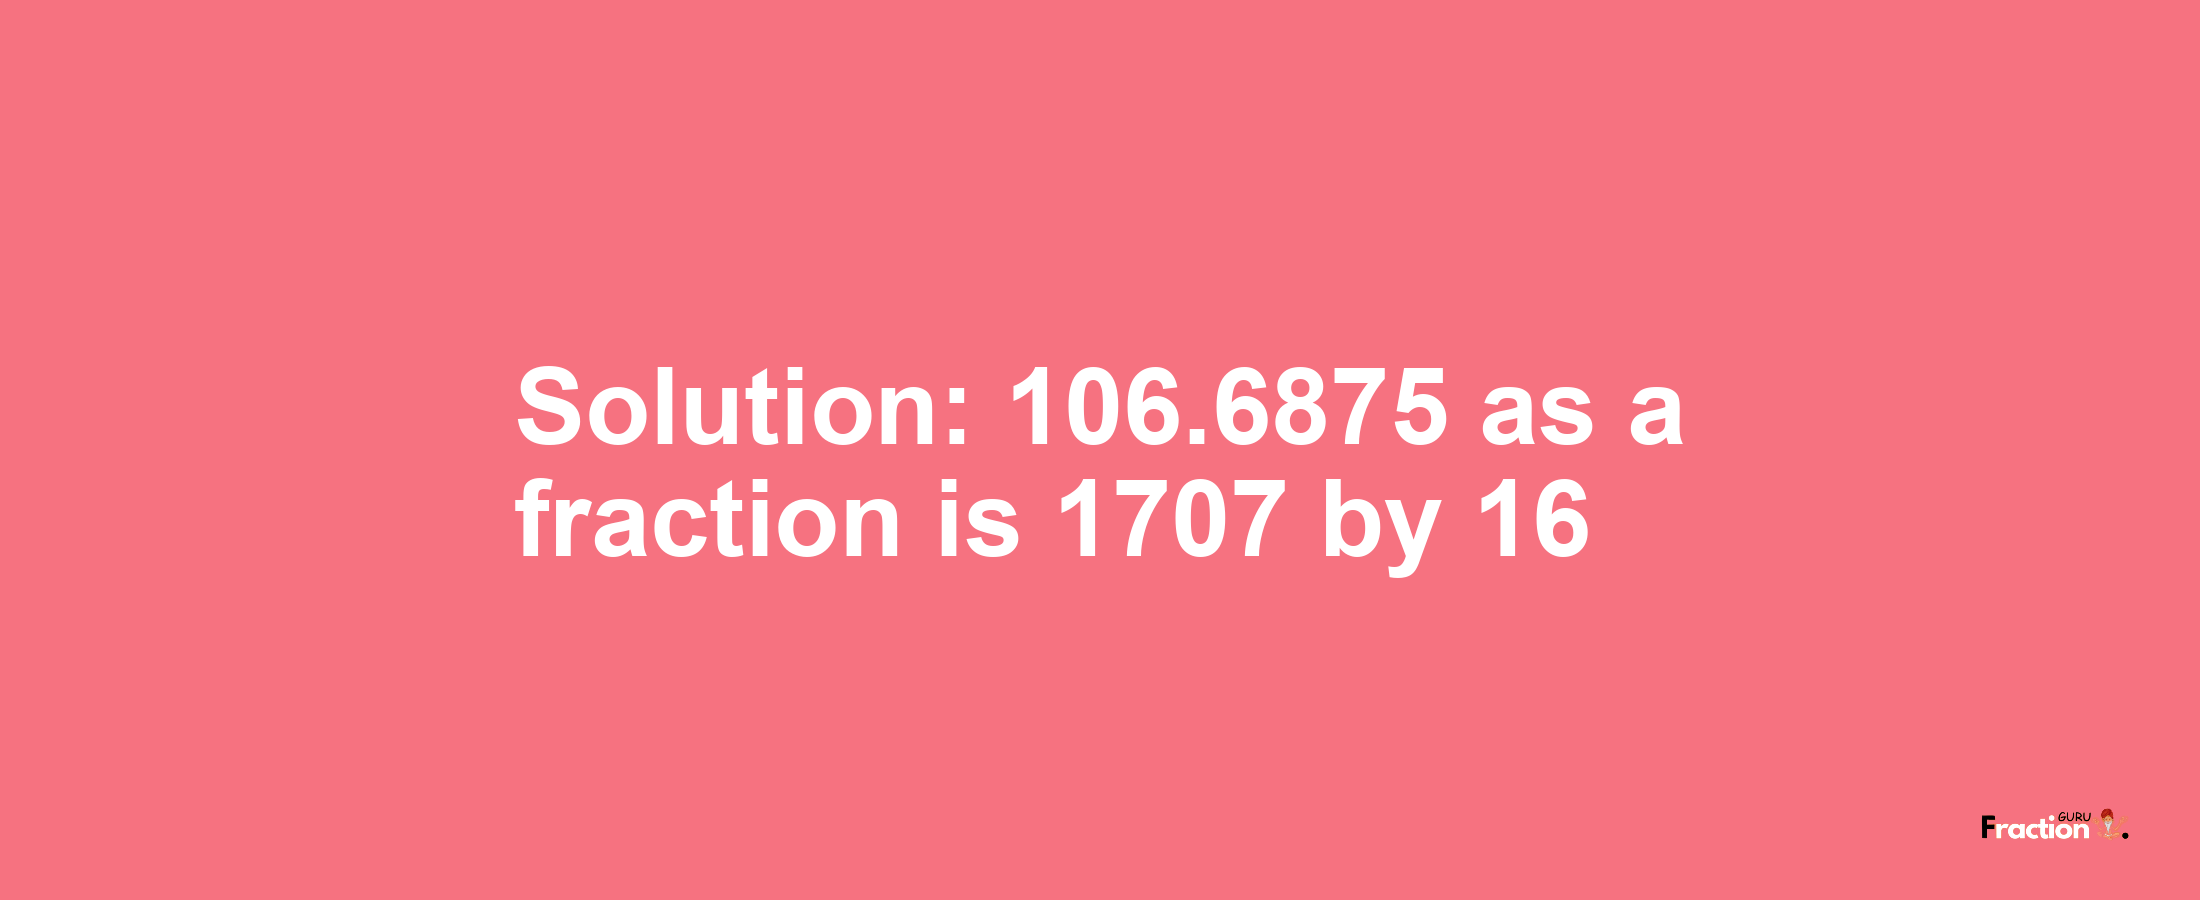 Solution:106.6875 as a fraction is 1707/16